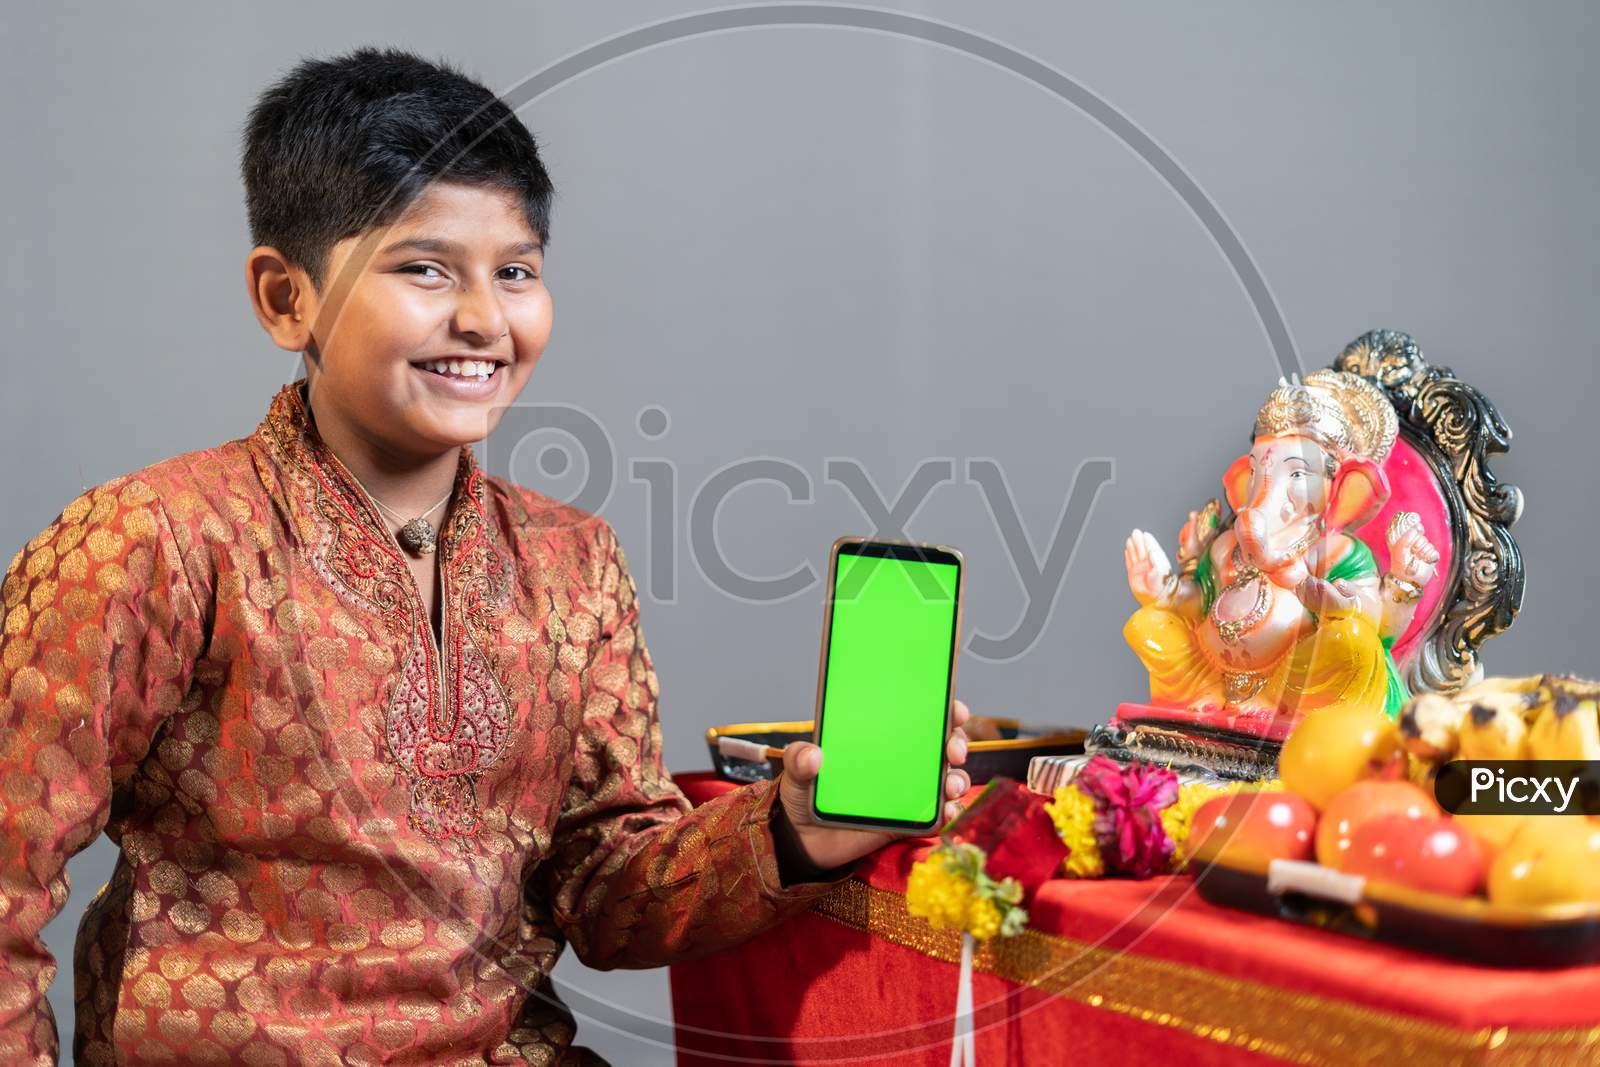 Studio Shot Of Happy Smiling Kid Holding Mobile Phone With Green Screen In Front Of Lord Ganesha Idol During Festival Celebrations.